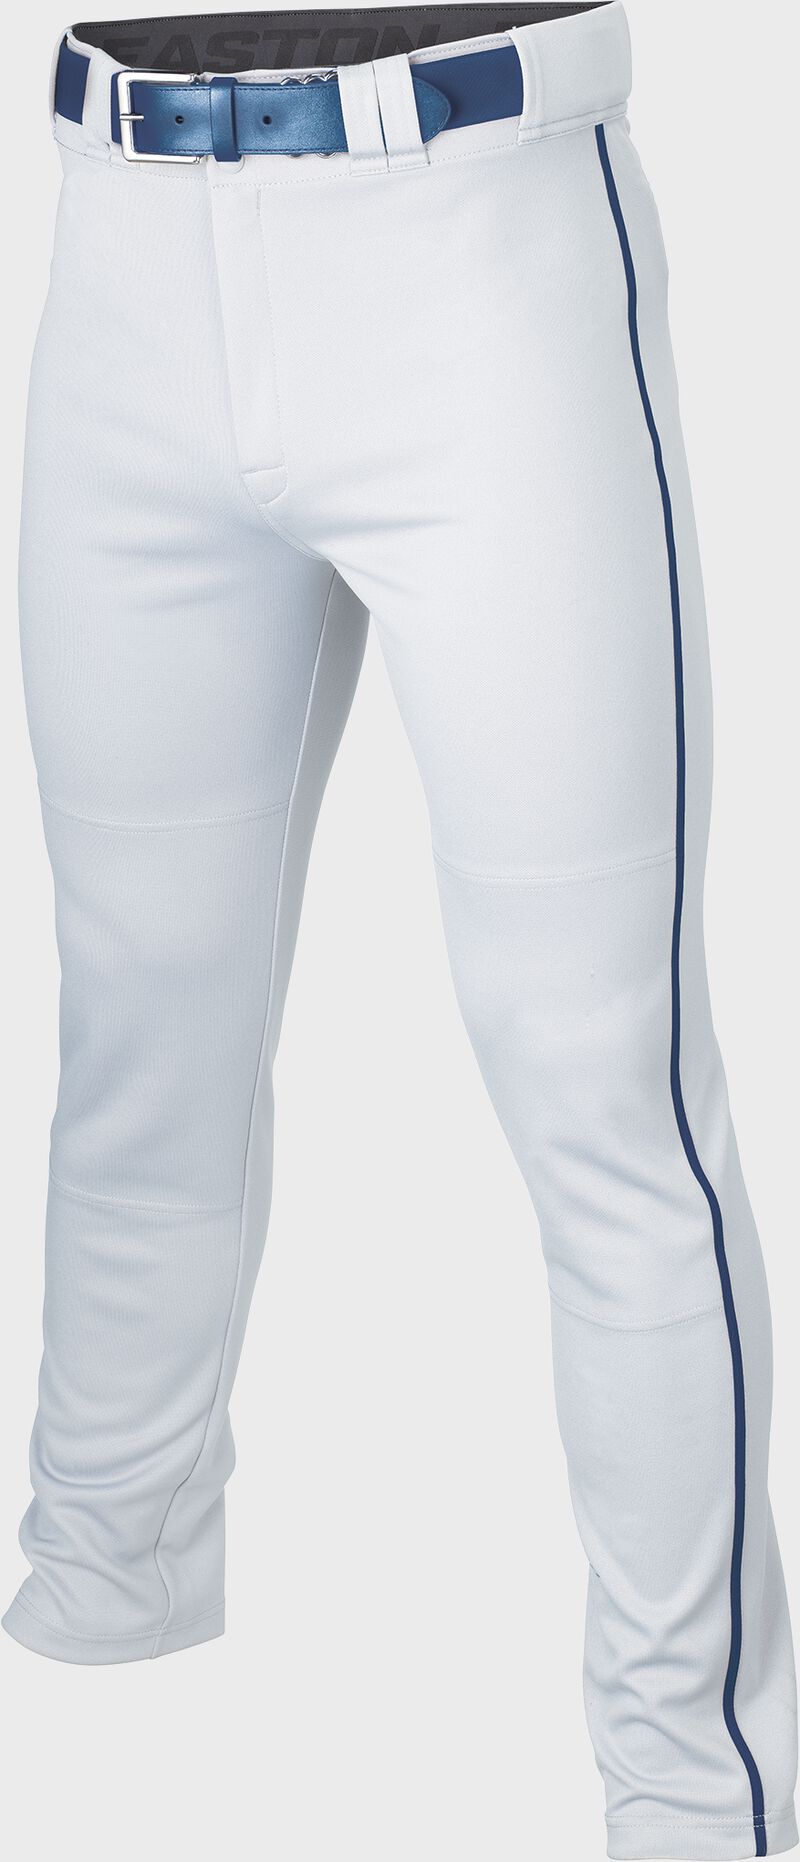 Rival+ Pant Youth Piped WHITE/NAVY M